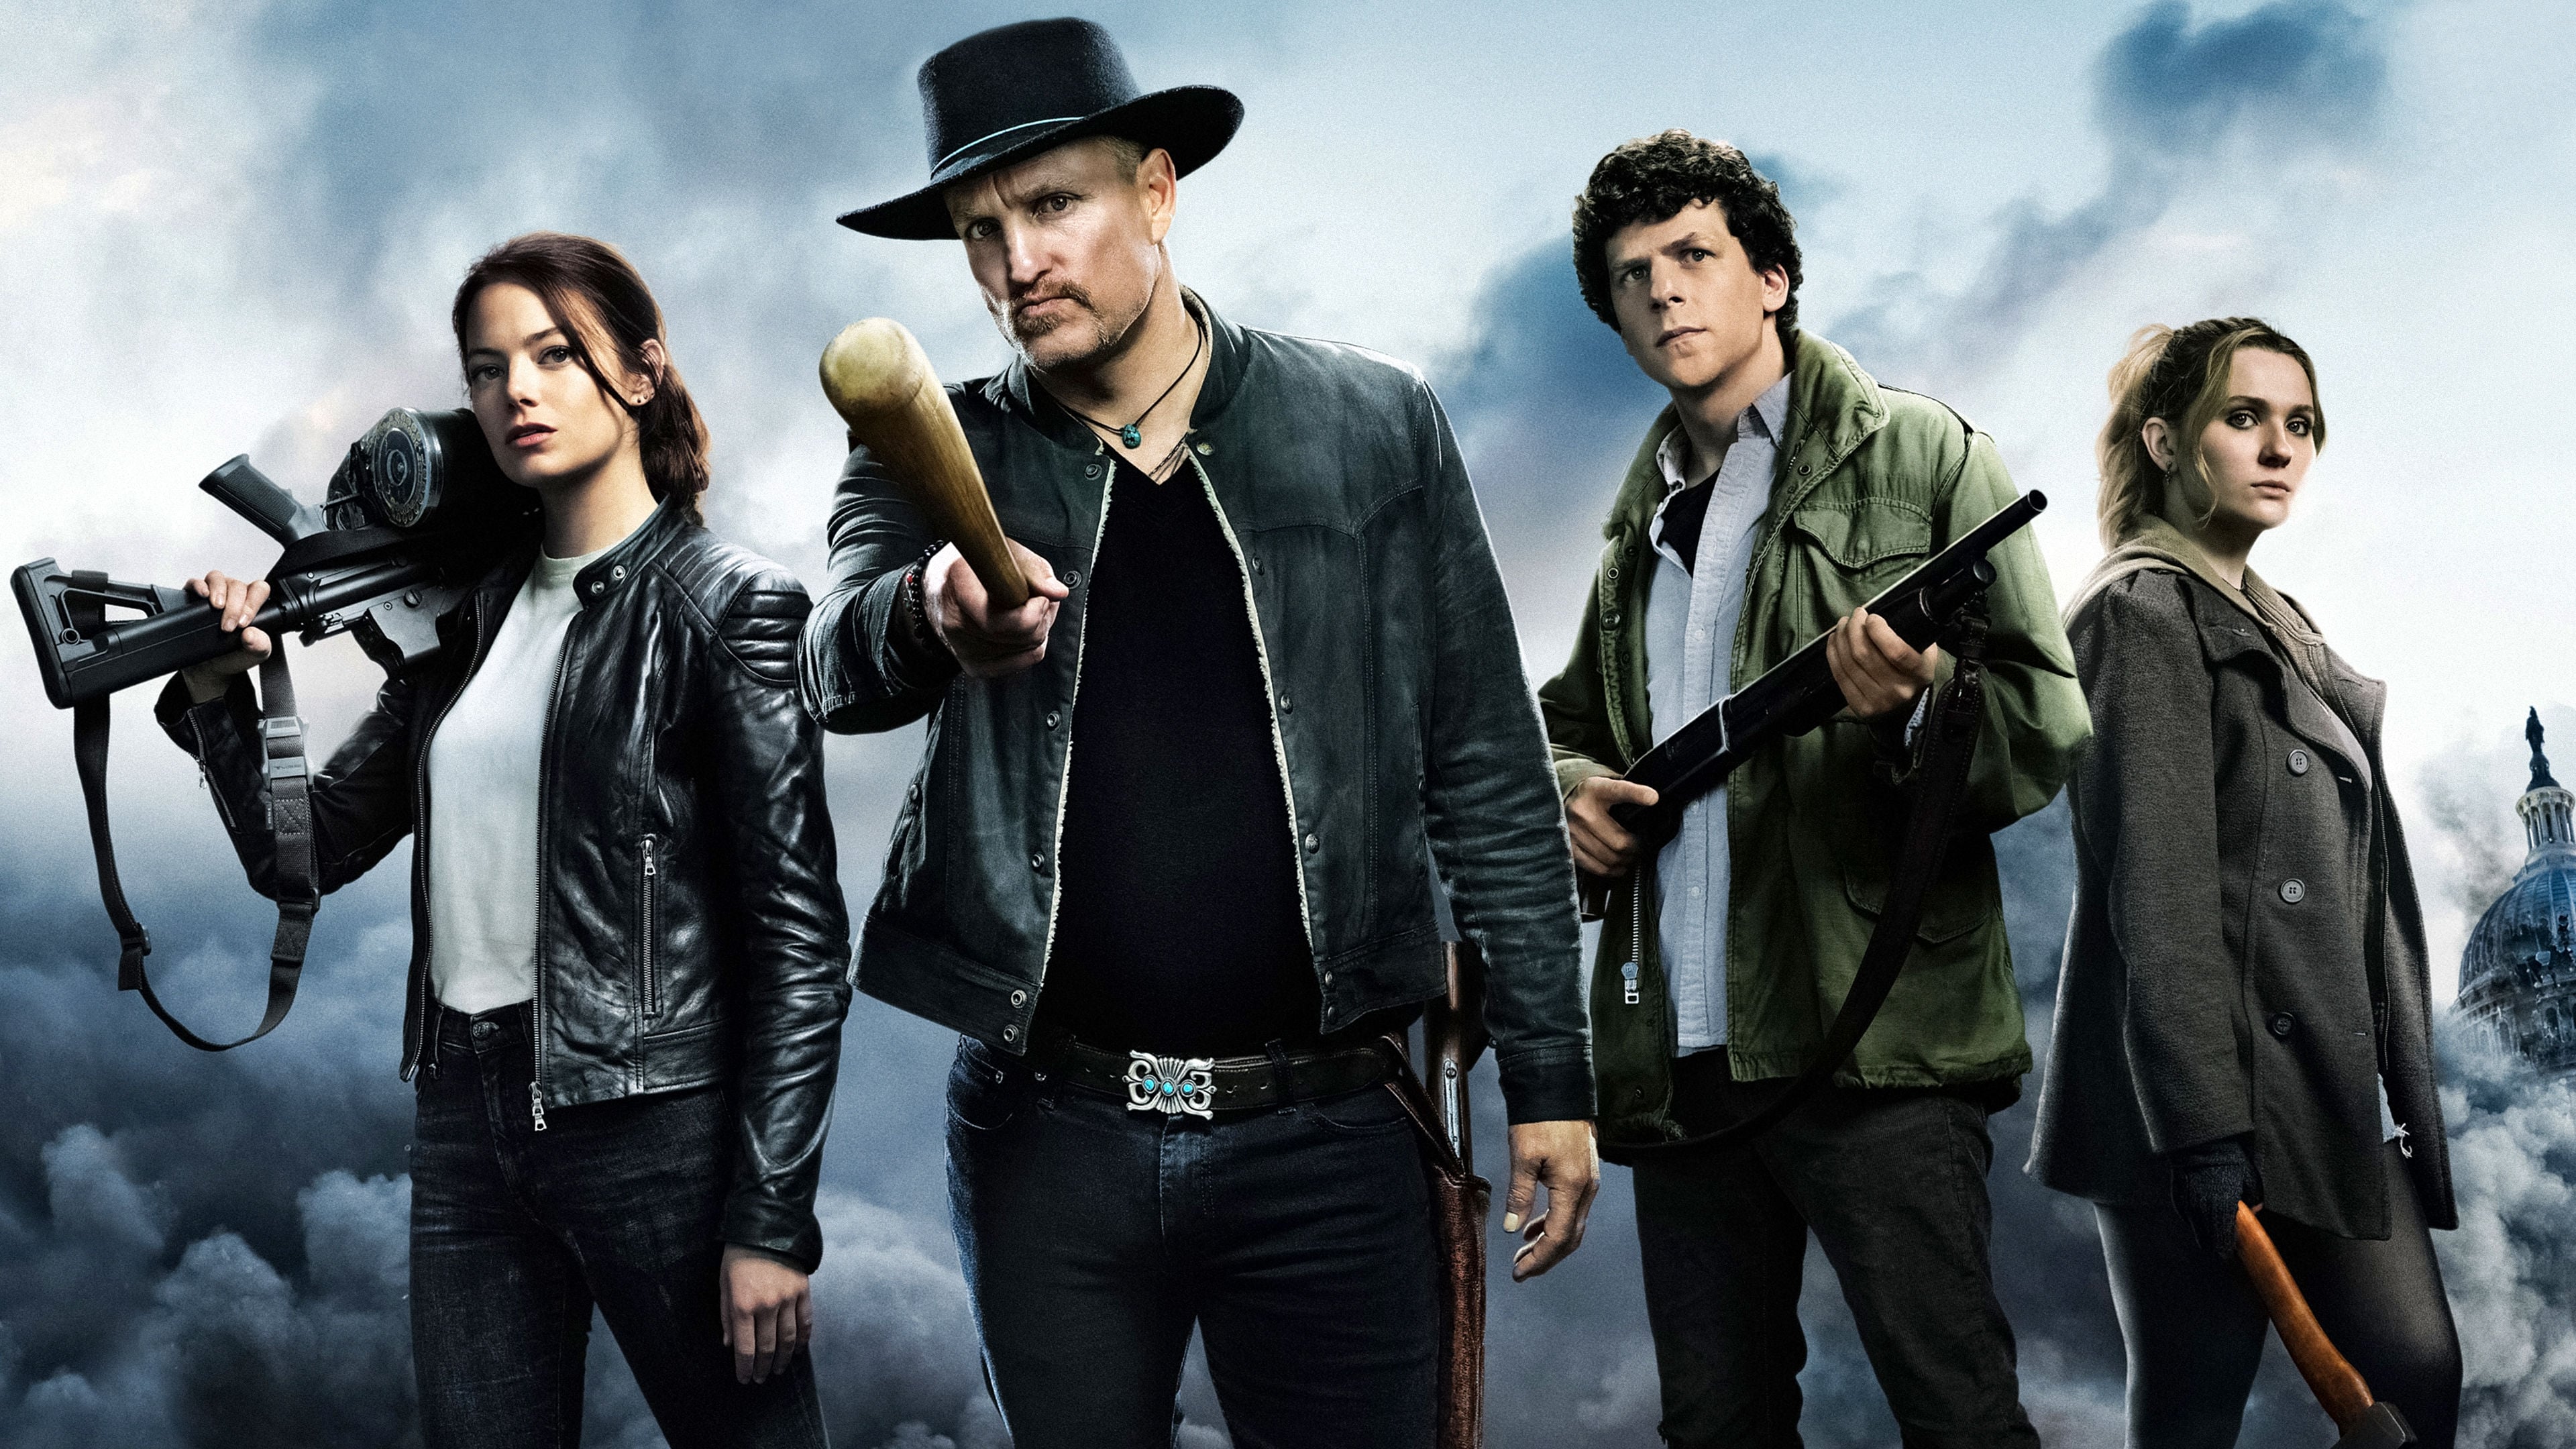 Zombieland: Double Tap 2019 123movies